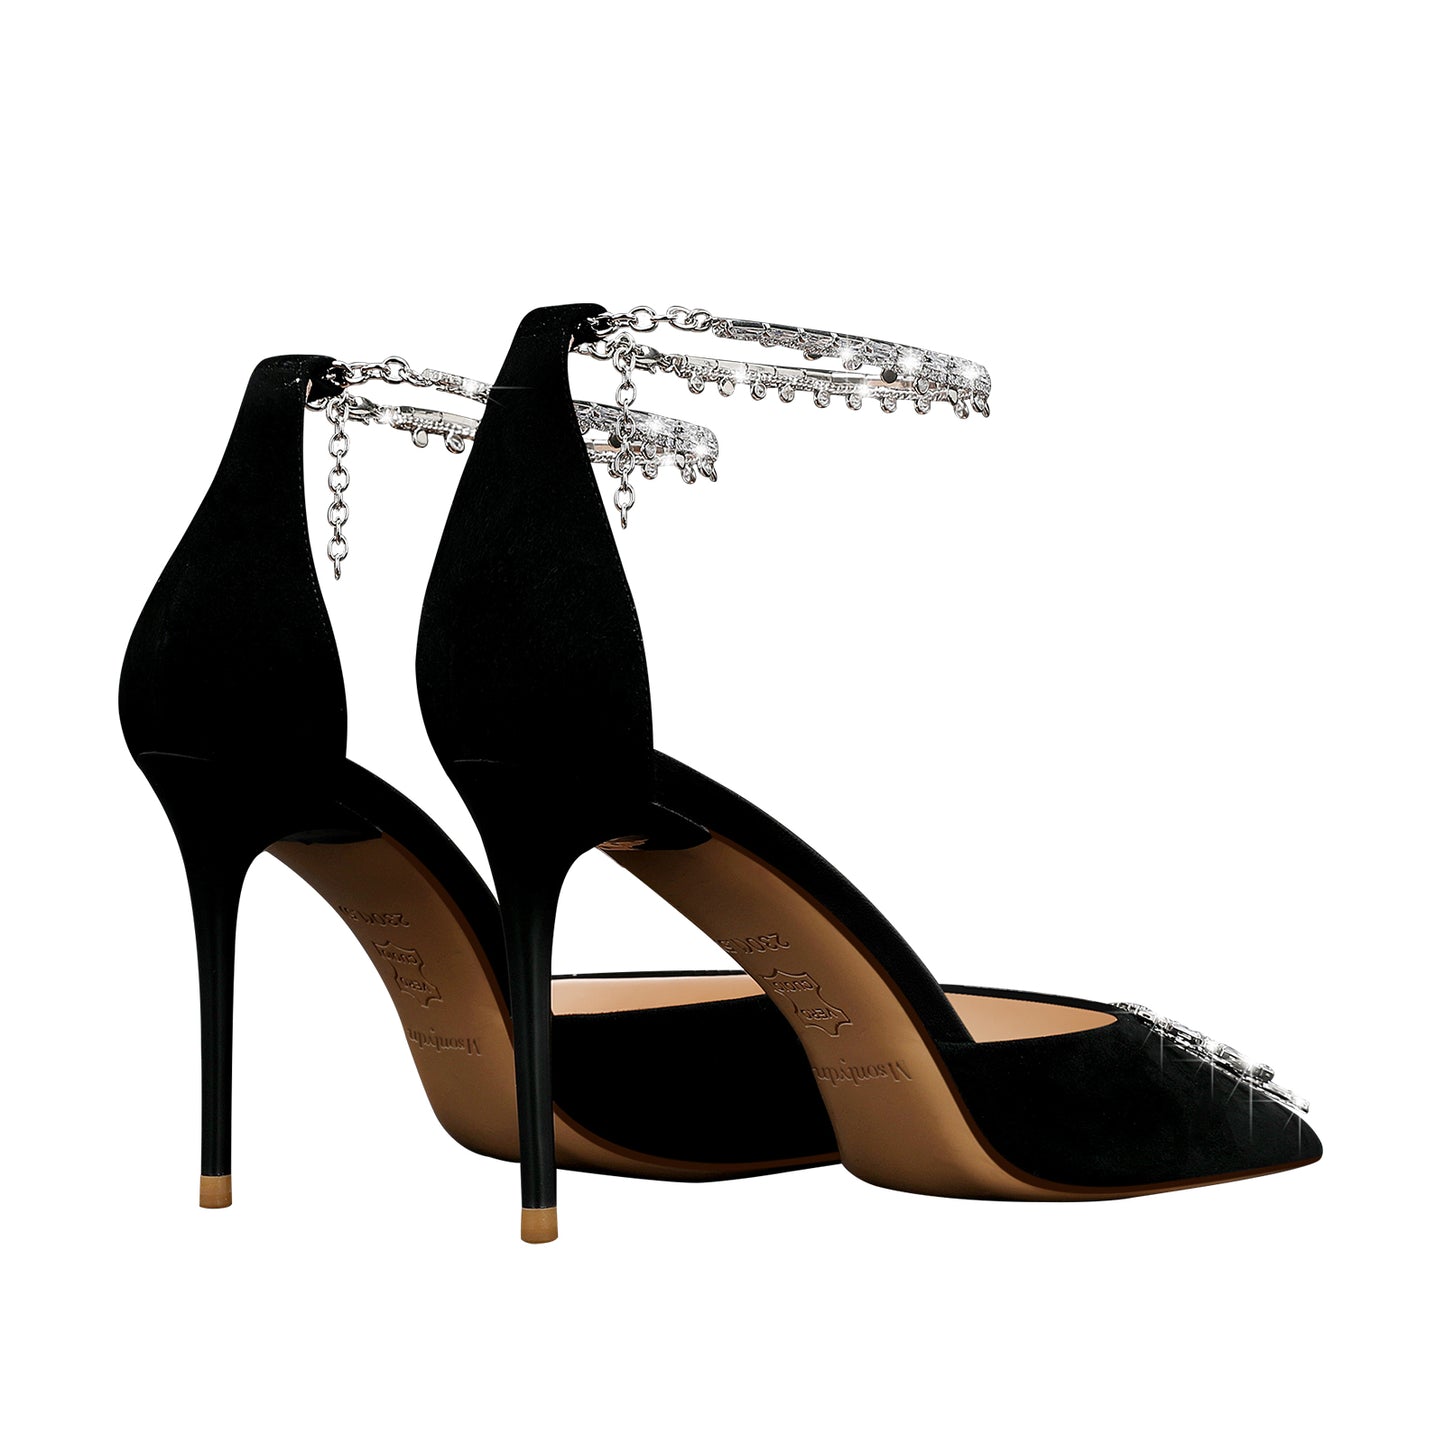 Leather High Heels, Bow Tie Sandals & Pointed Toe Stiletto Heels